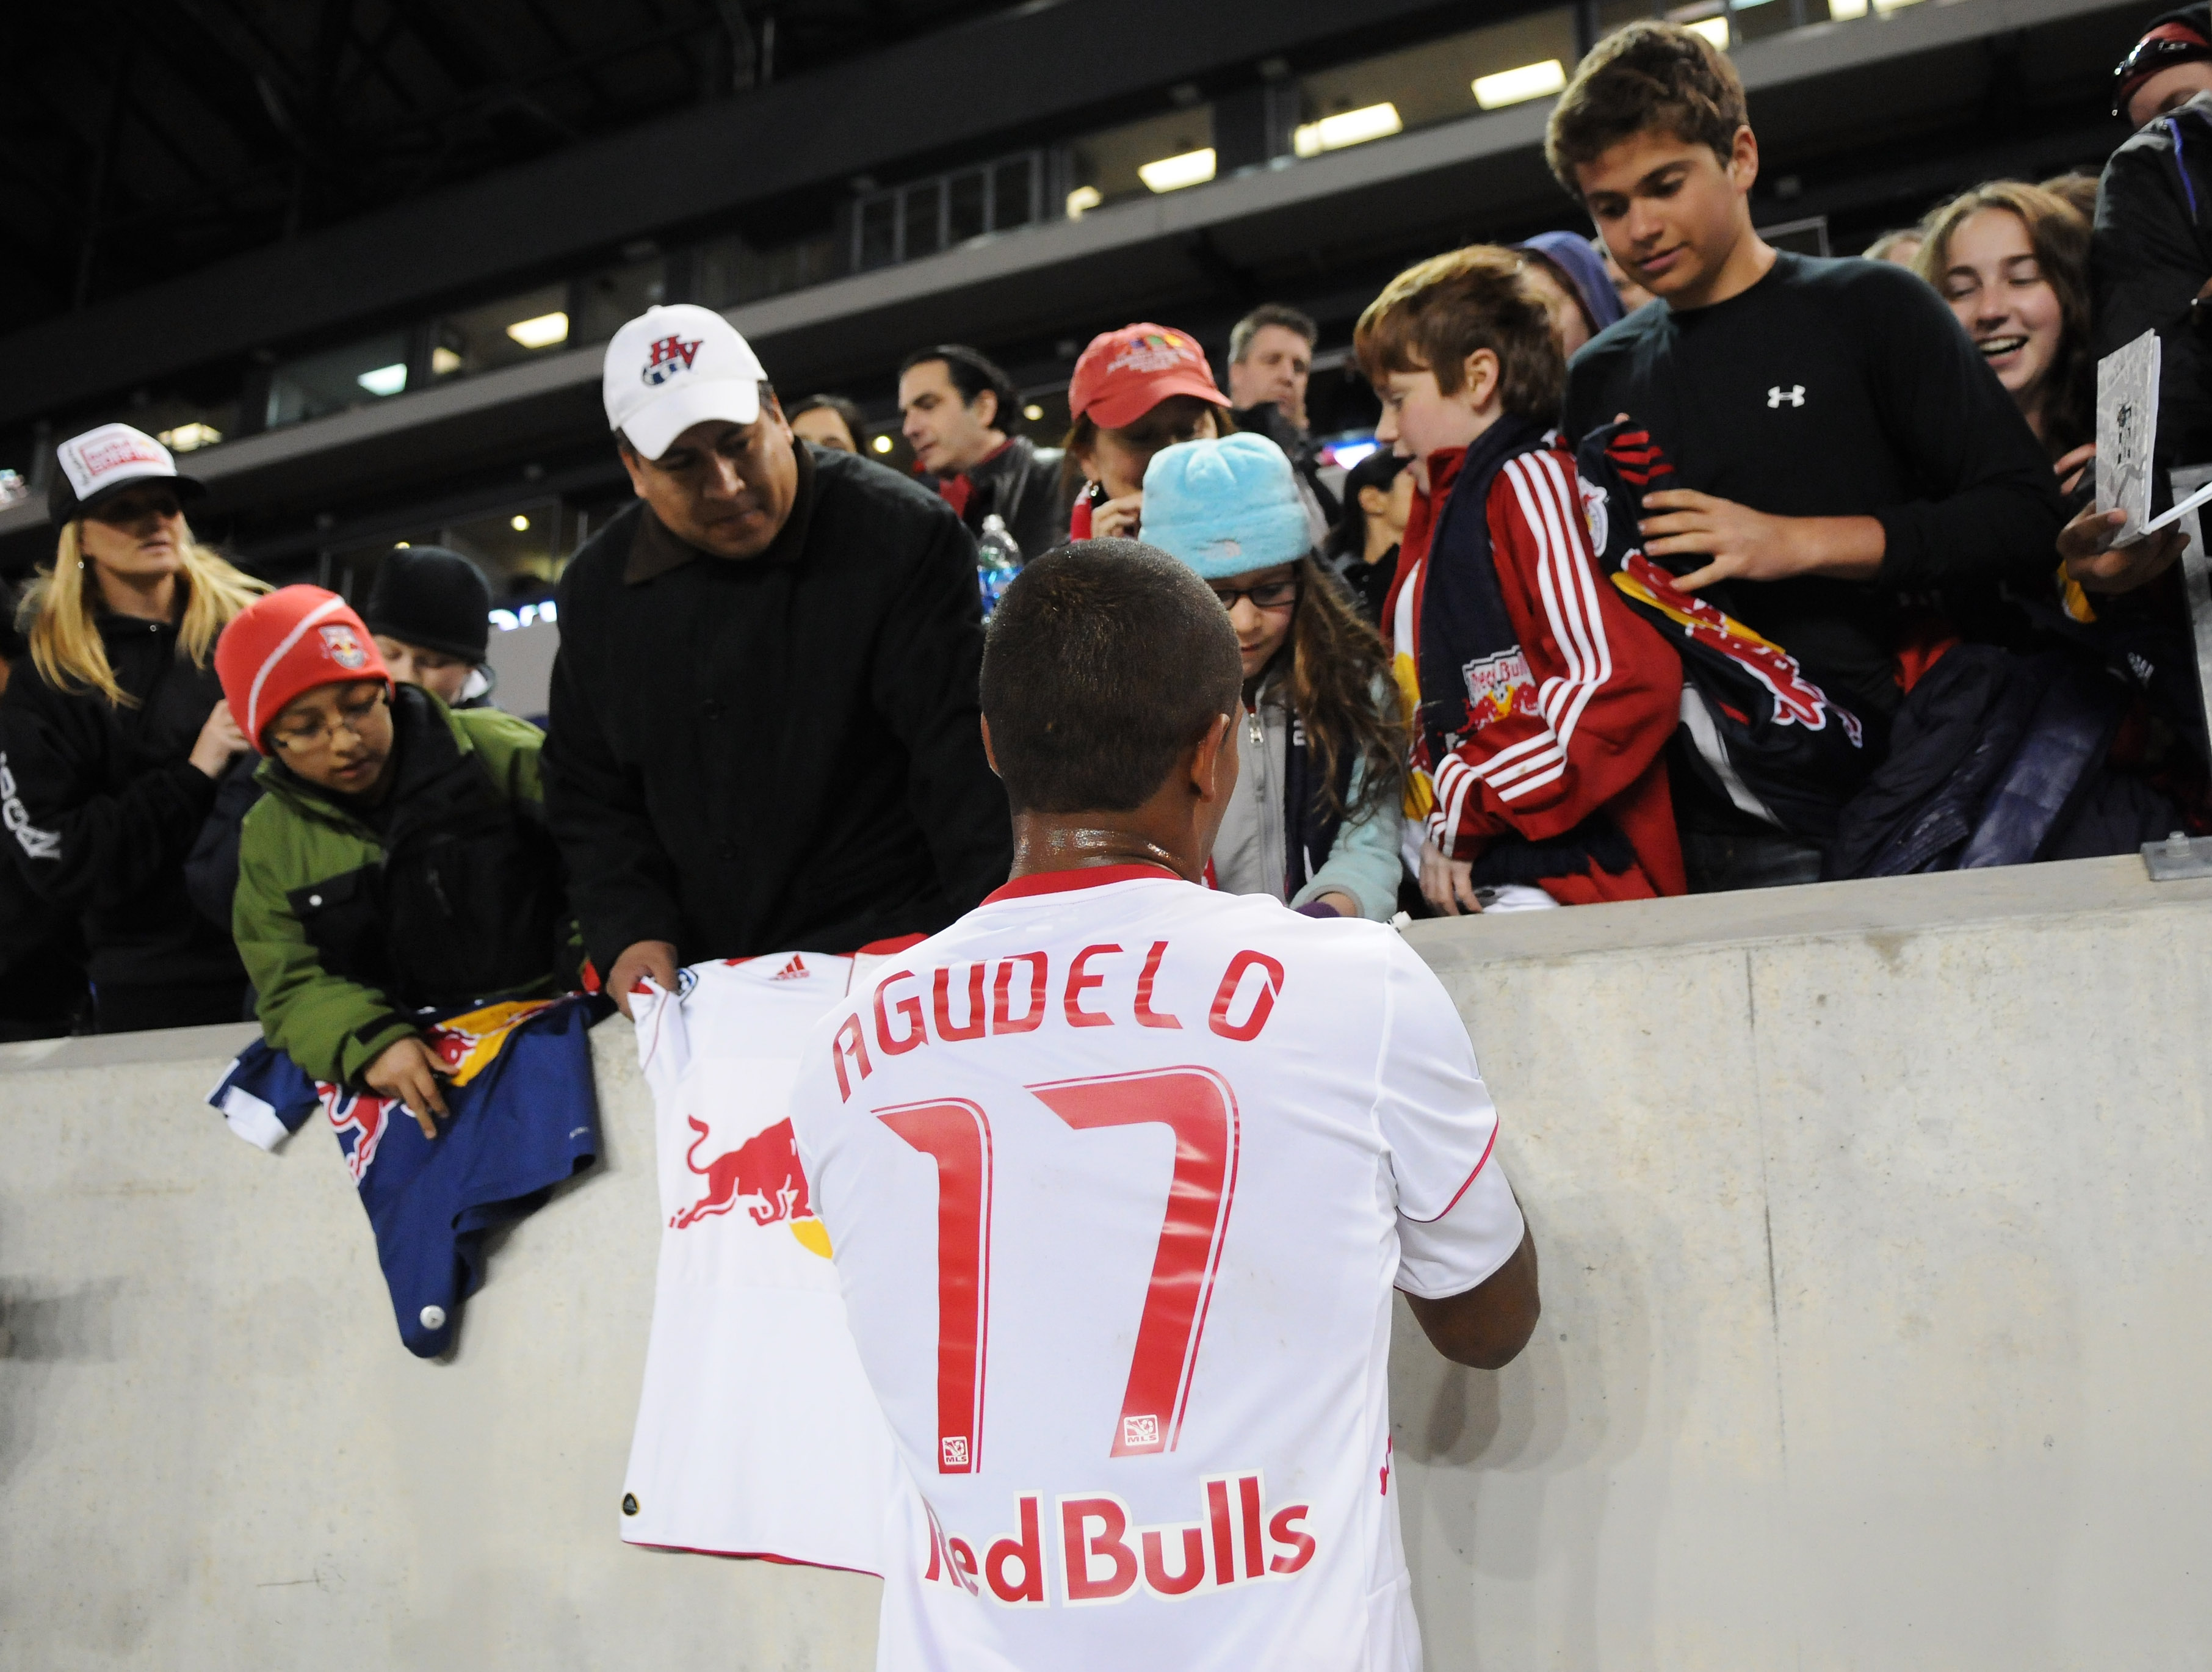 HARRISON, NJ - APRIL 02:  Juan Agudelo #17 of the New York Red Bulls signs autographs after their game against the Houston Dynamo at Red Bull Arena on April 2, 2011 in Harrison, New Jersey.  (Photo by Jonathan Fickies/Getty Images for New York Red Bulls)